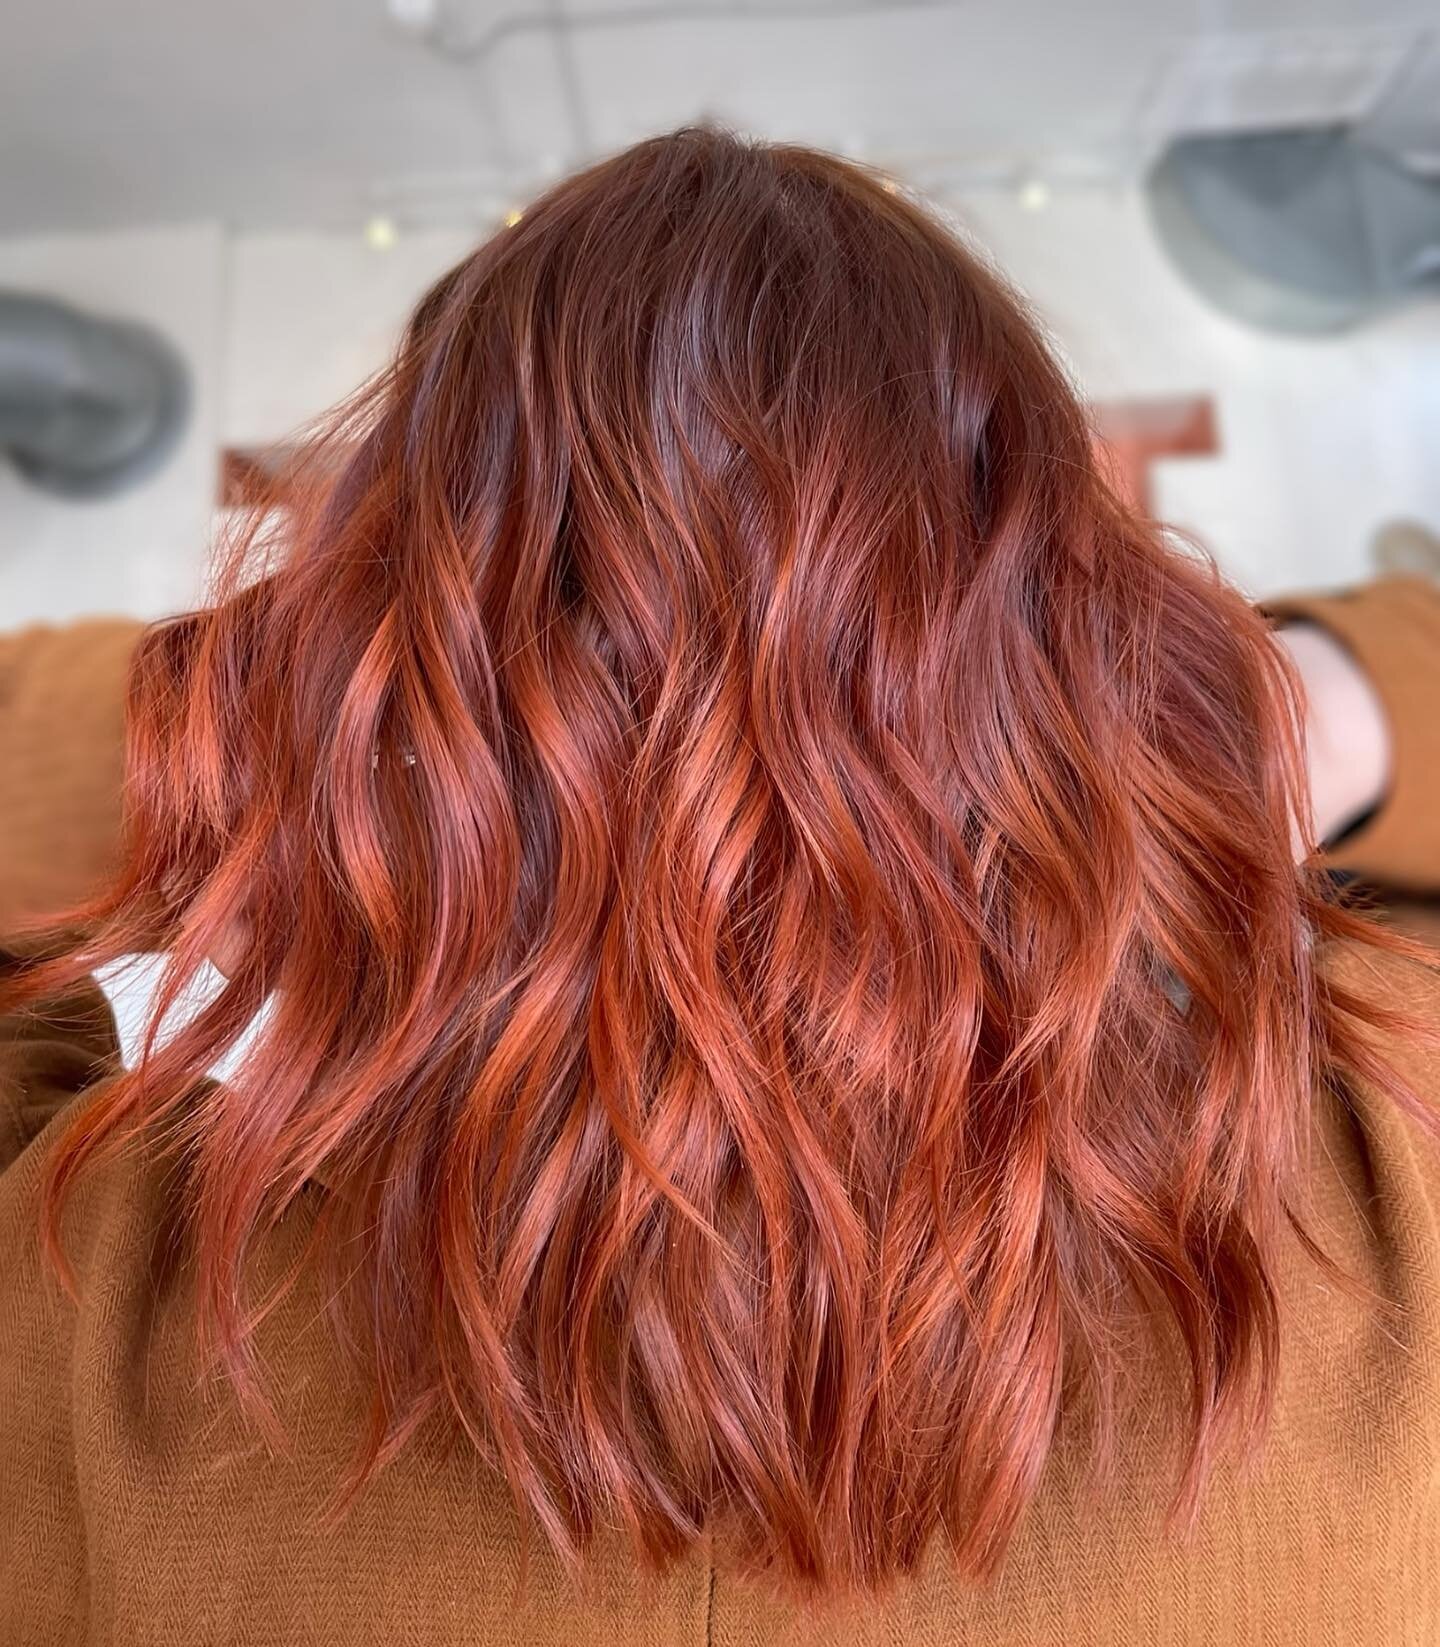 Take a peak at this before! ✨
Chloe came in wanting to go bolder and brighter.
At our previous appointment we took a baby step into the darker copper side to ensure she would like it and it payed off! 
@kevin.murphy 
Base- 6.34+ 5.43 equal parts 10 v